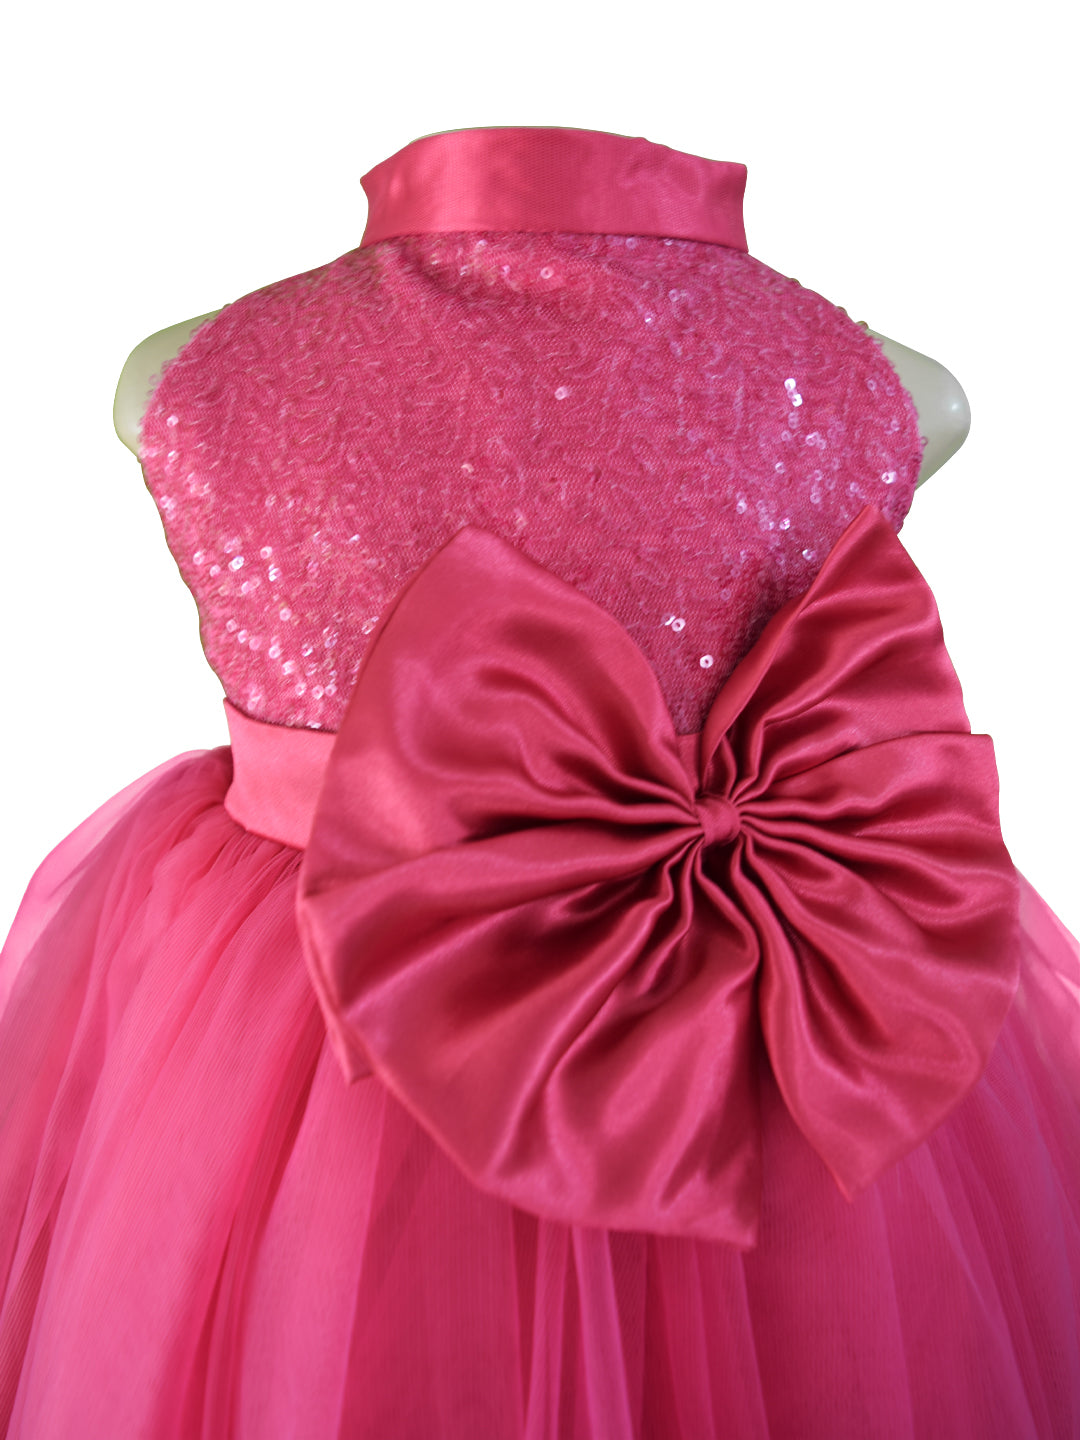 Gowns for Girls | Faye Fuchsia Sequin Gown - faye